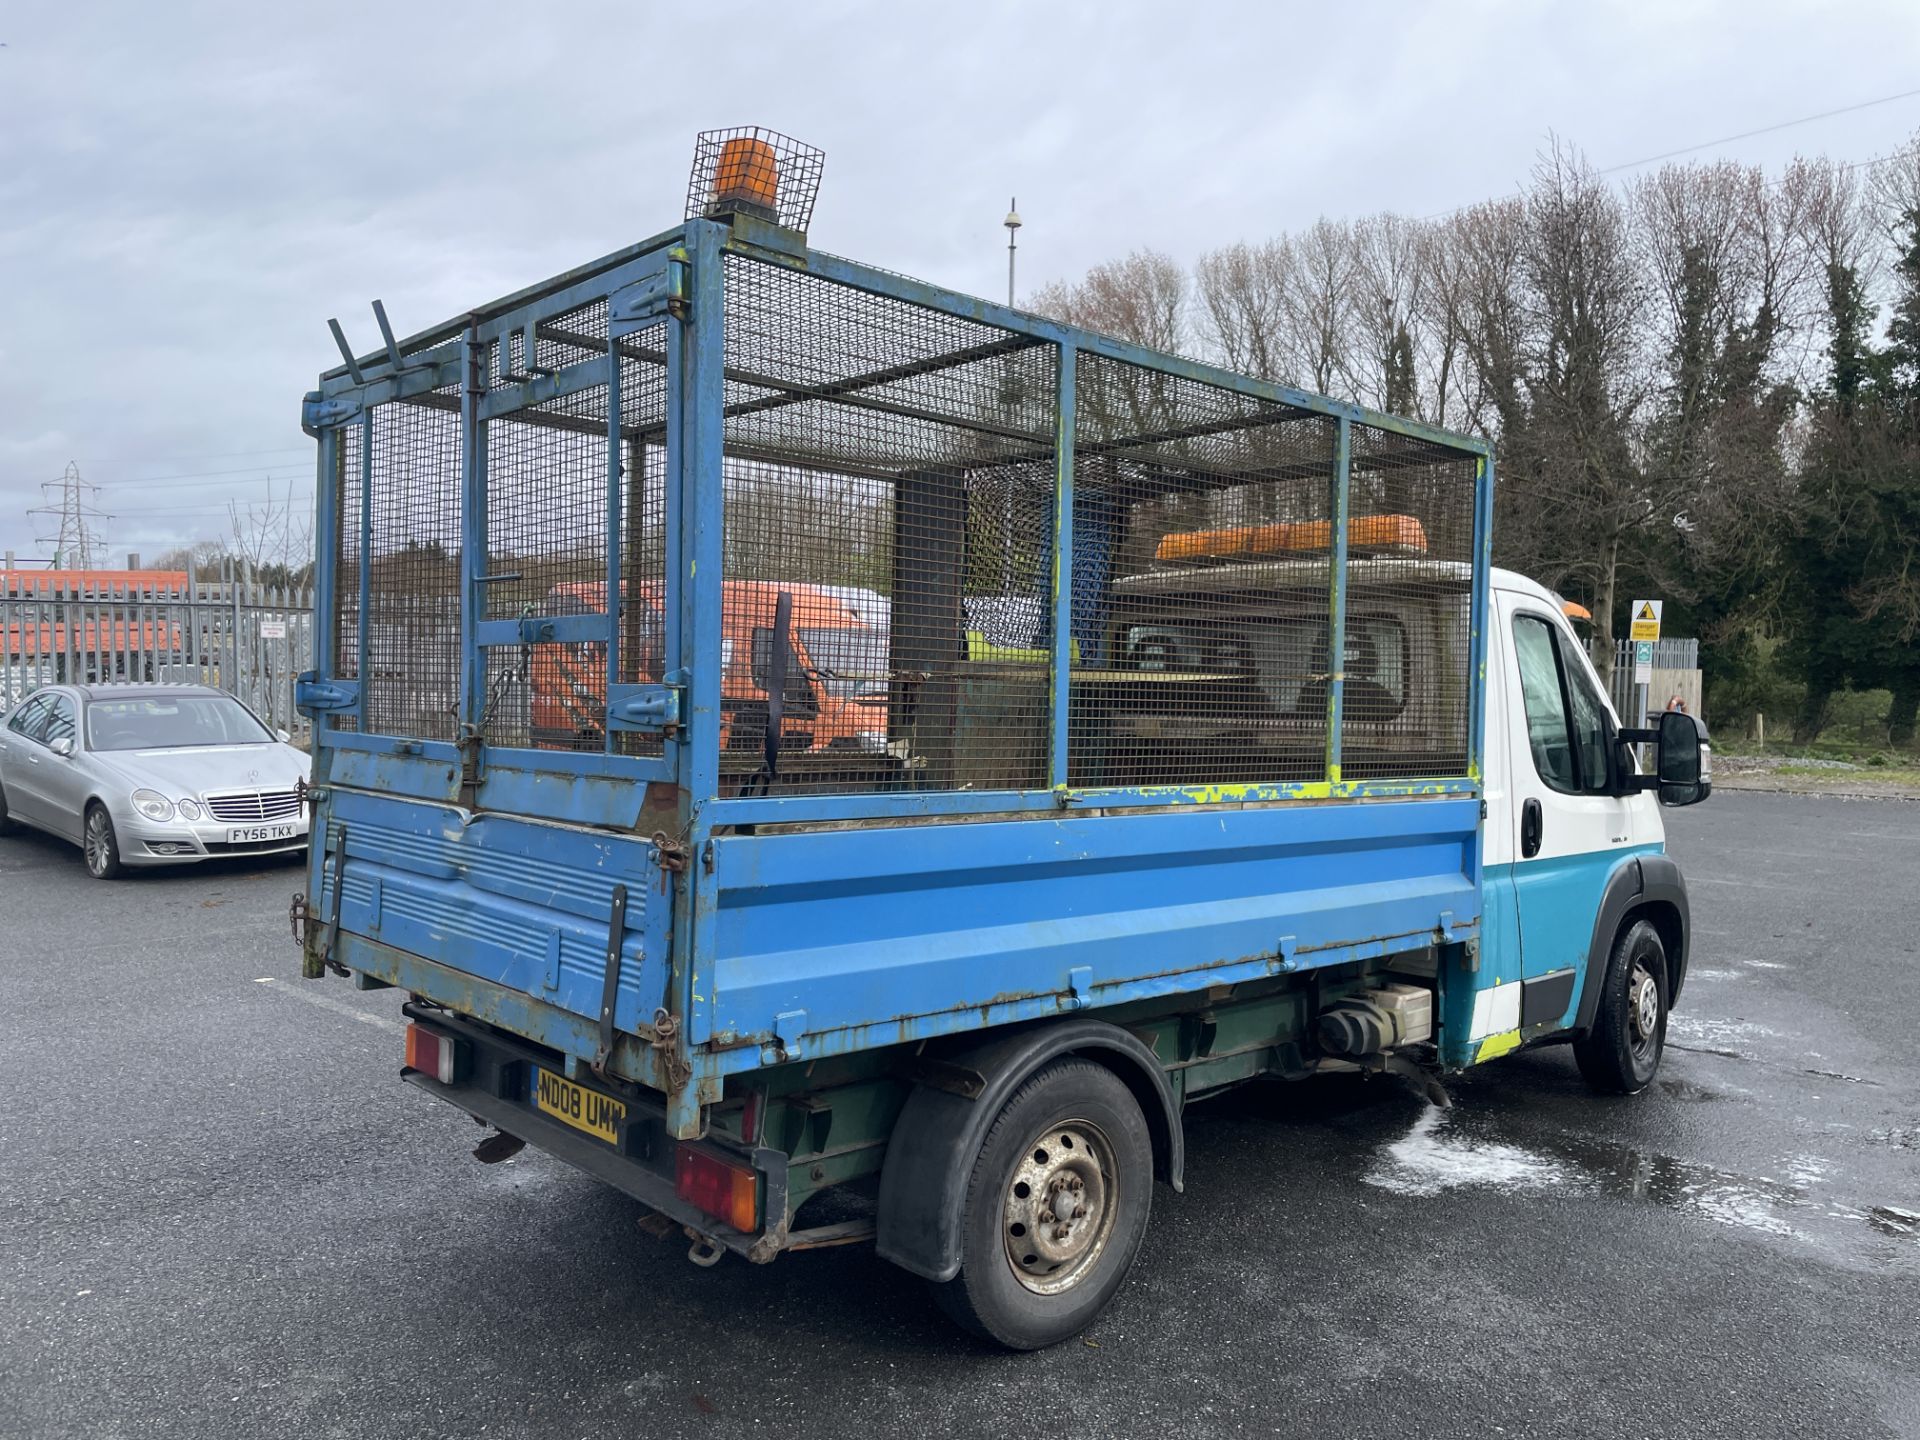 Citroen Relay Caged Tipper with rare Wheelie Bin Lift (39568) - Image 4 of 19